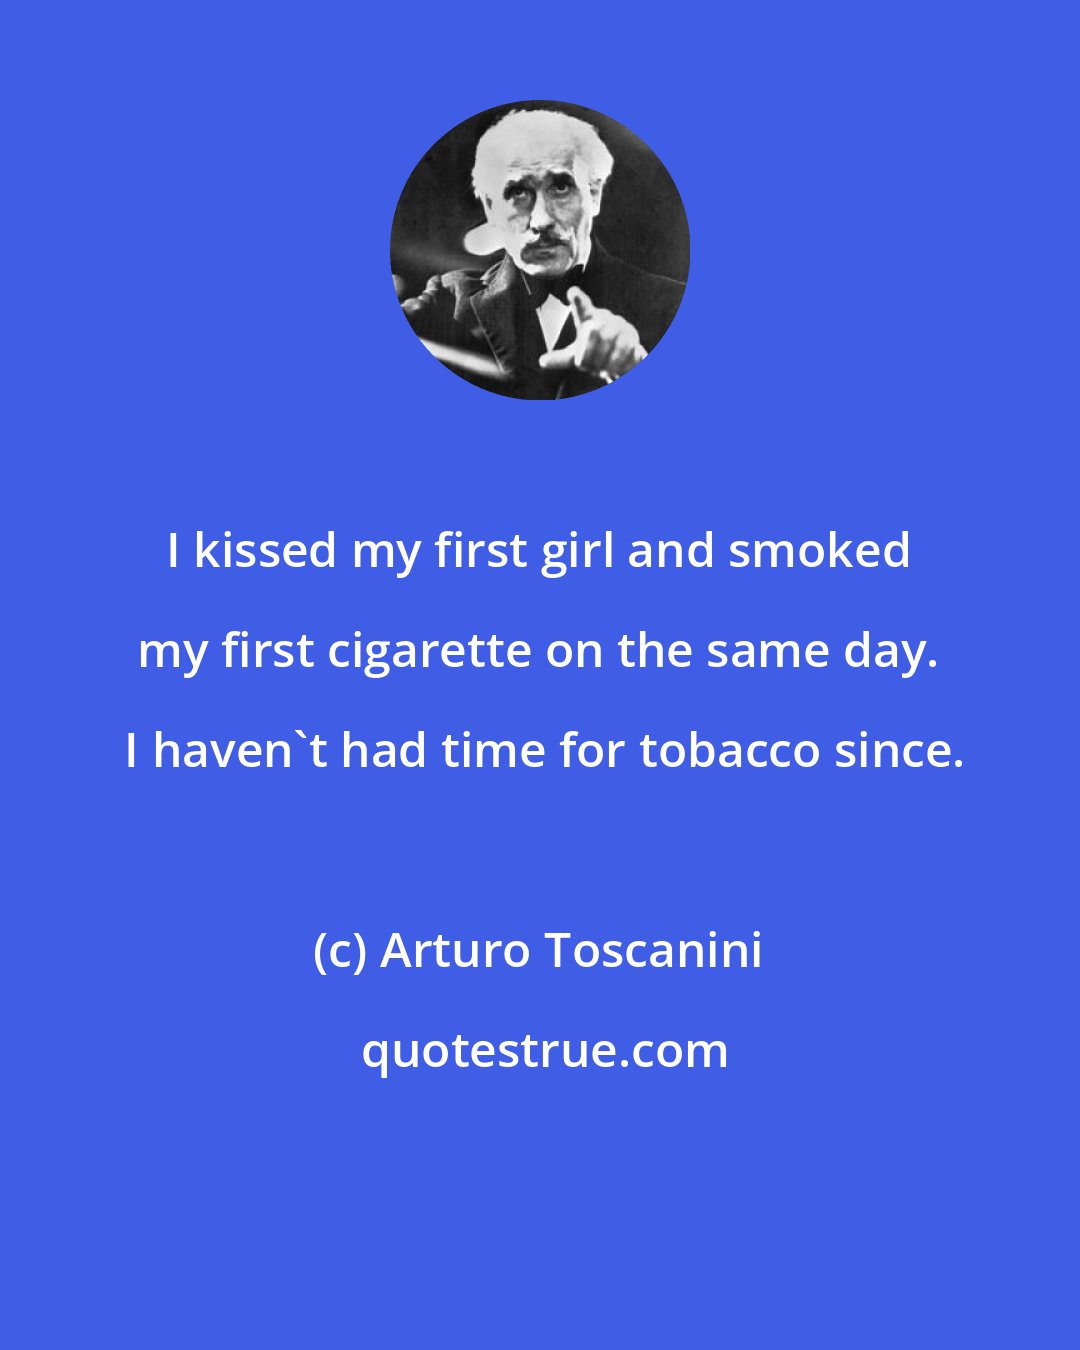 Arturo Toscanini: I kissed my first girl and smoked my first cigarette on the same day.  I haven't had time for tobacco since.